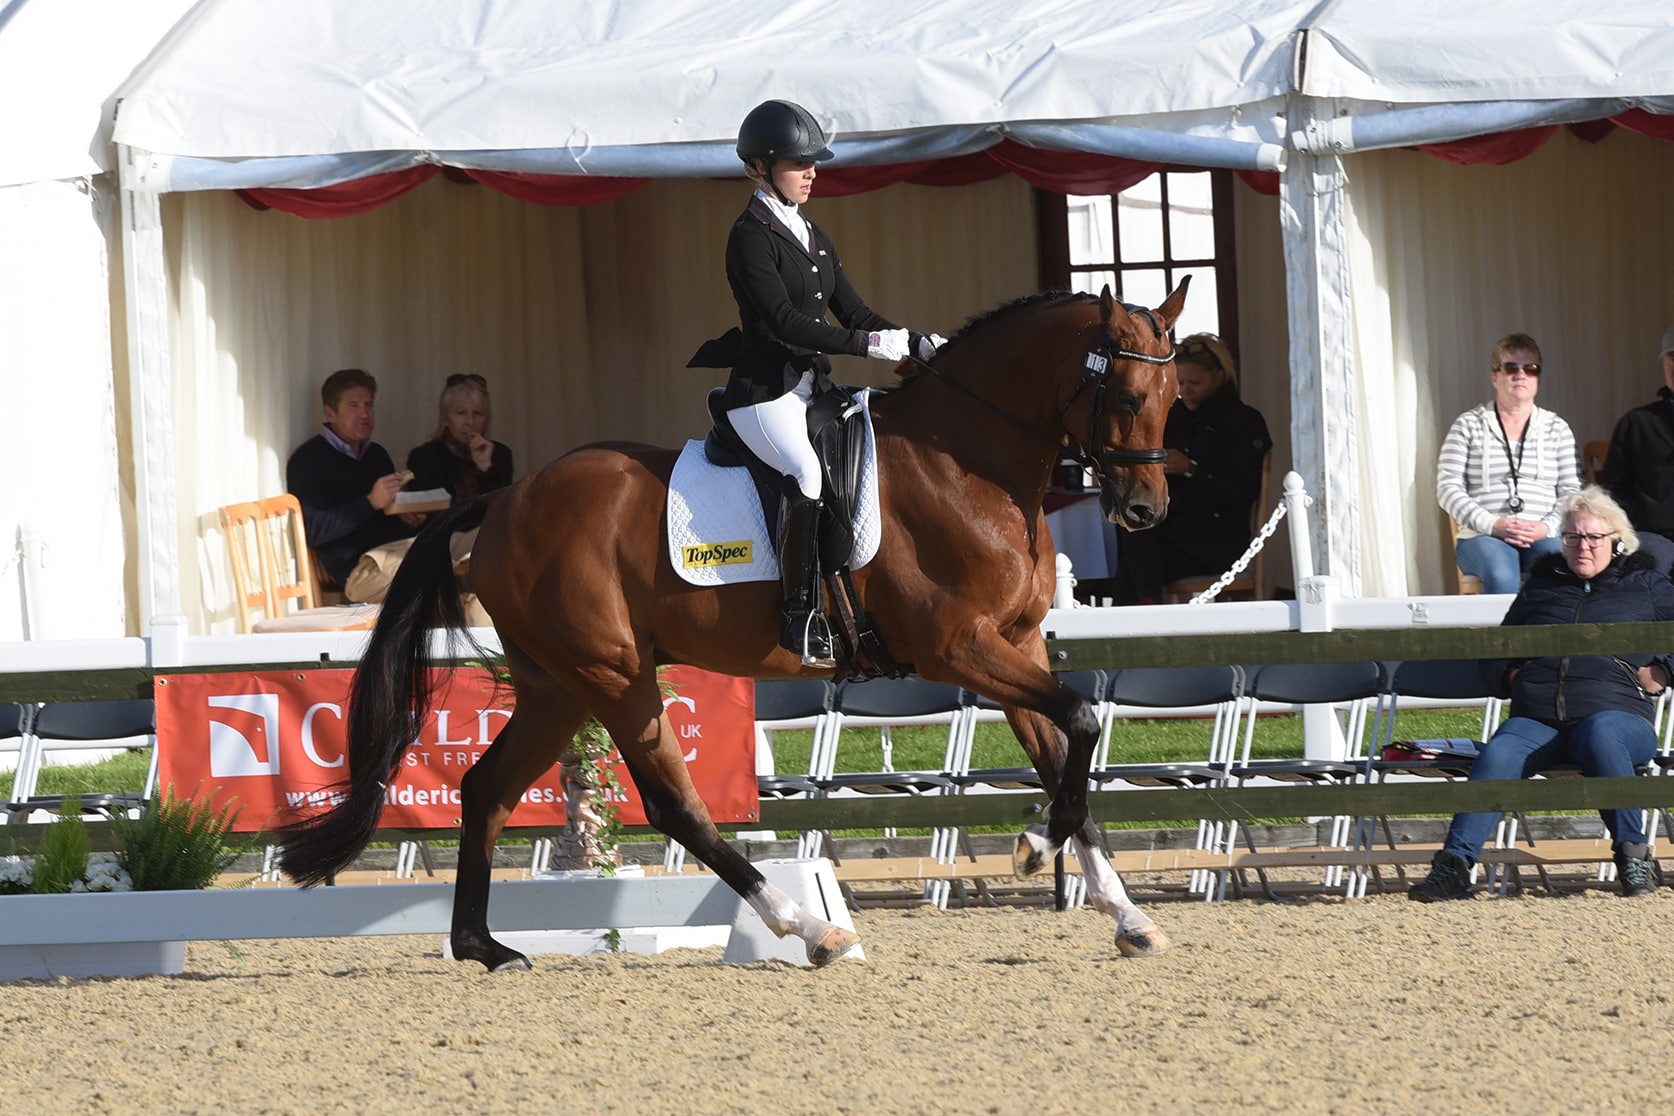 Benito Dorato wining the Novice Gold Championhip at the British Dressage National Champions ridden and owned by Victoria Maw smaller 1